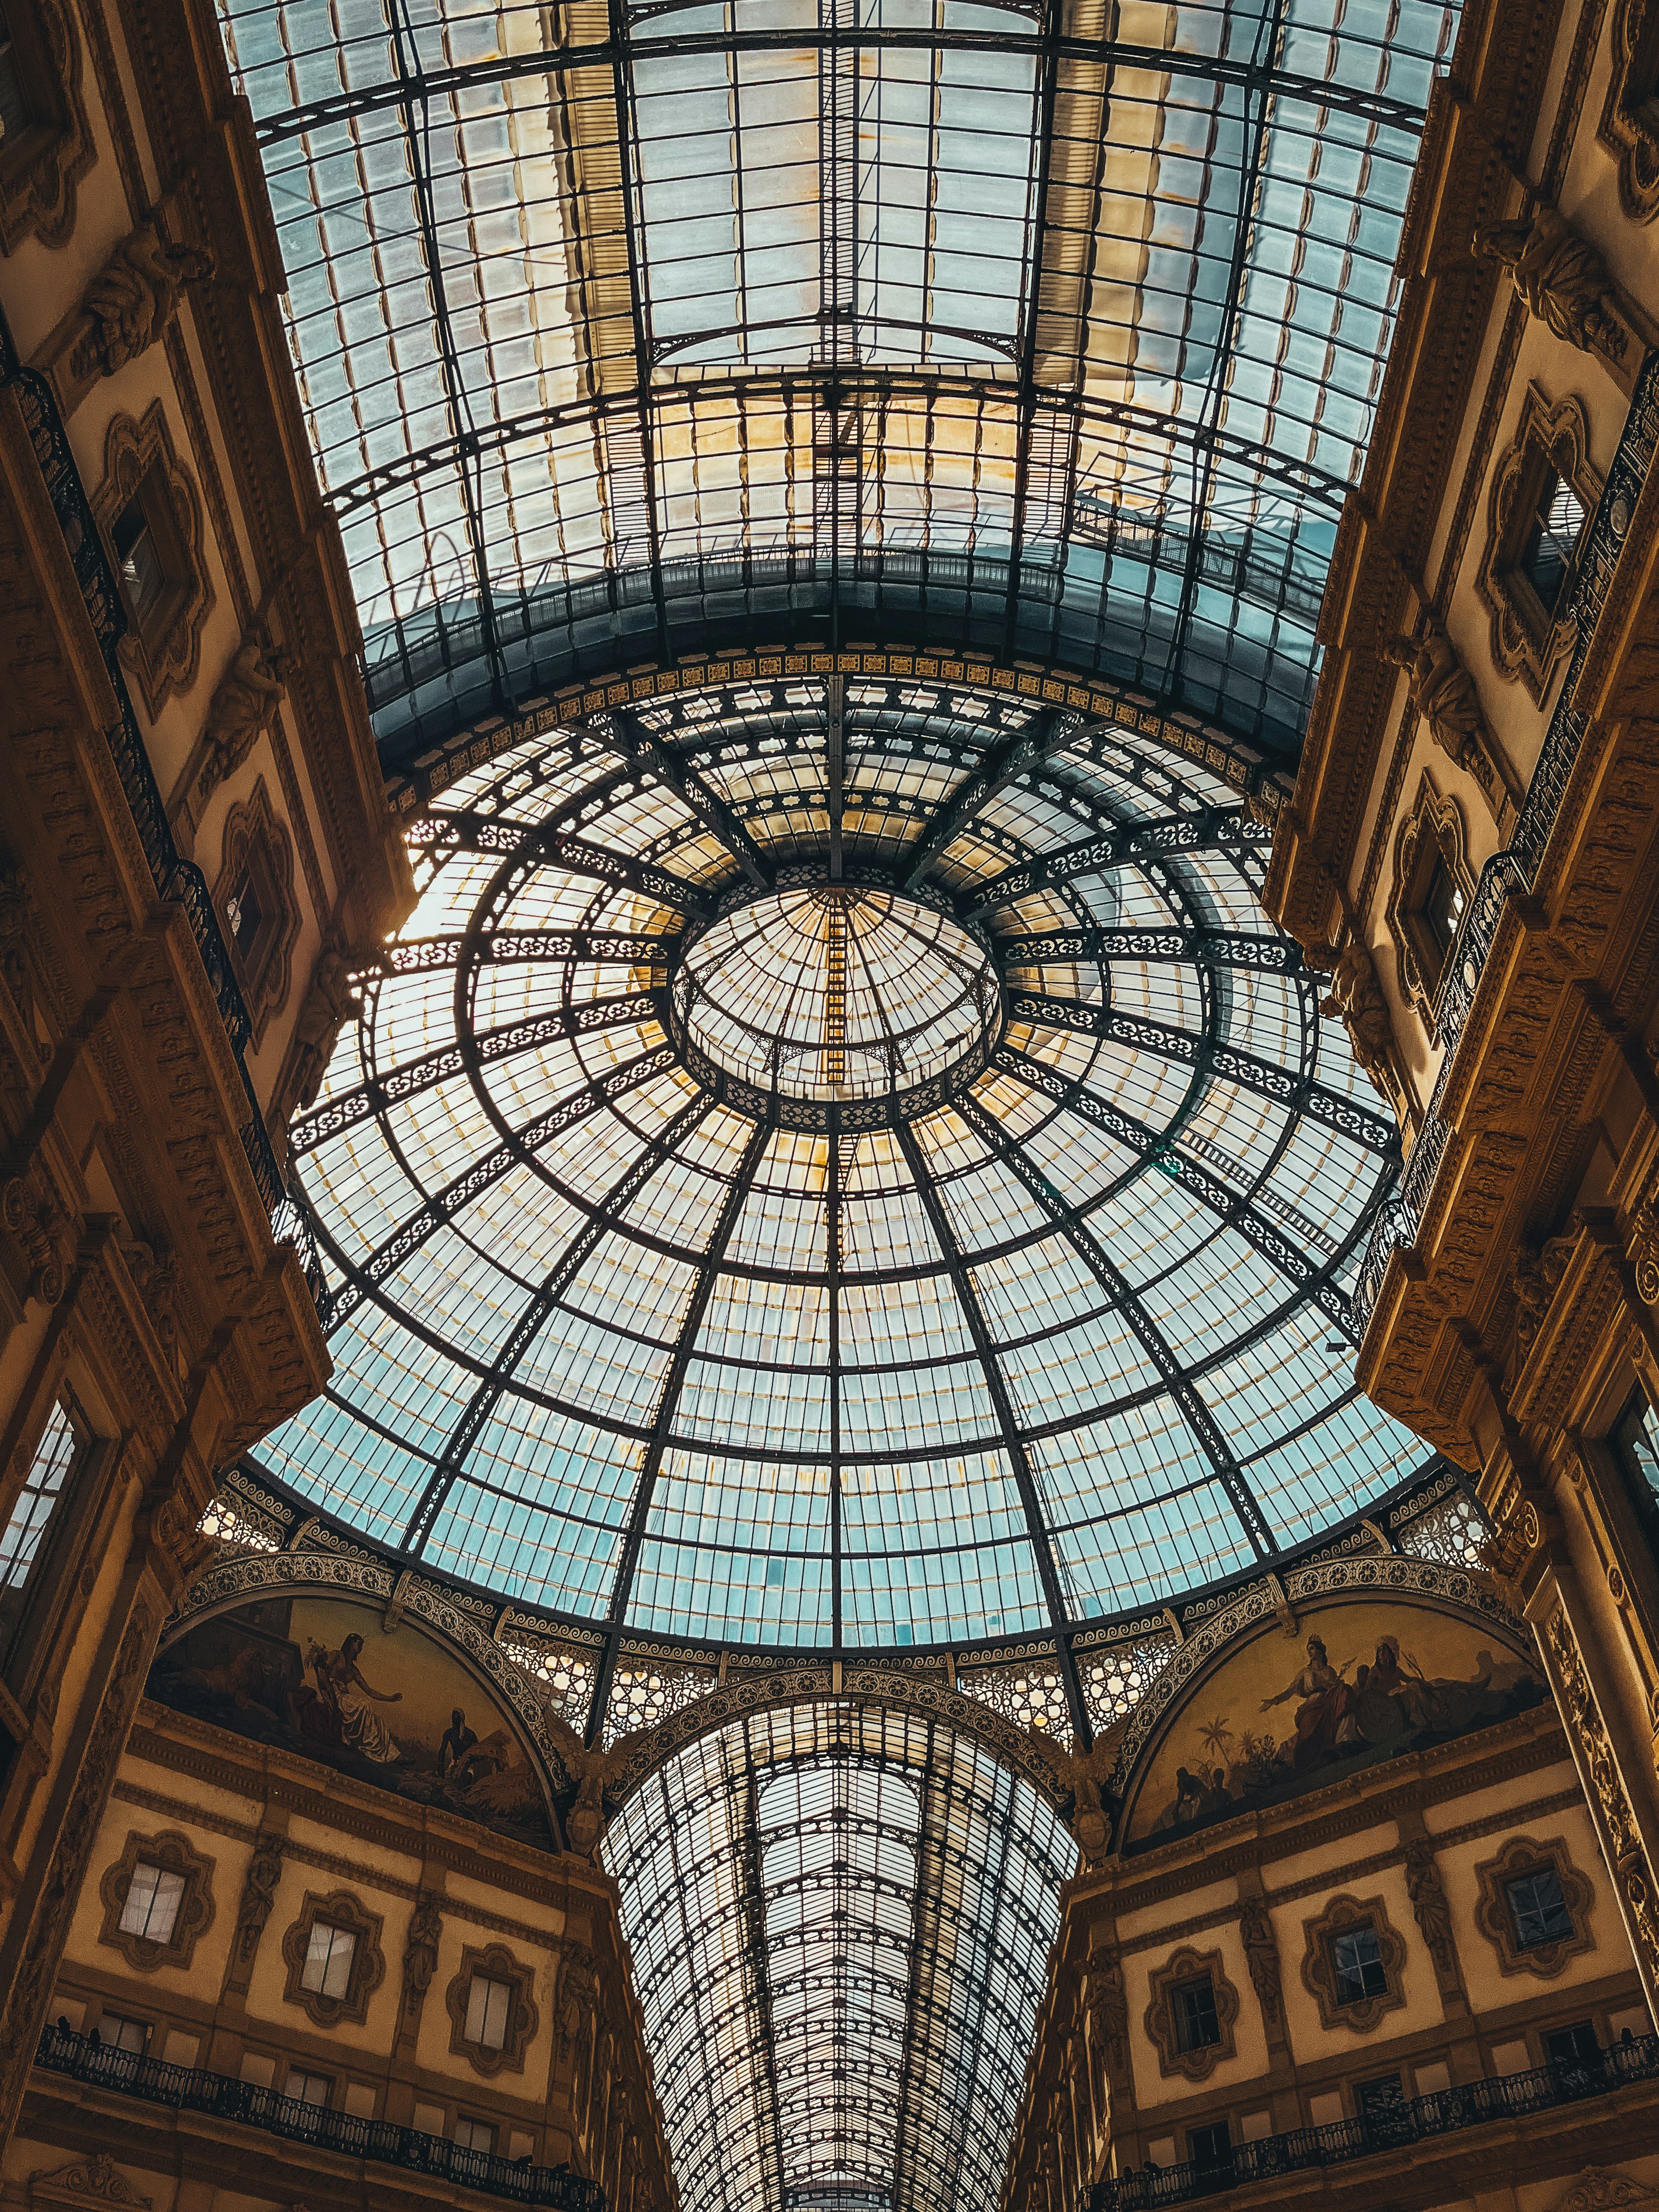 Choose from a curated selection of Italy photos. Always free on Unsplash.